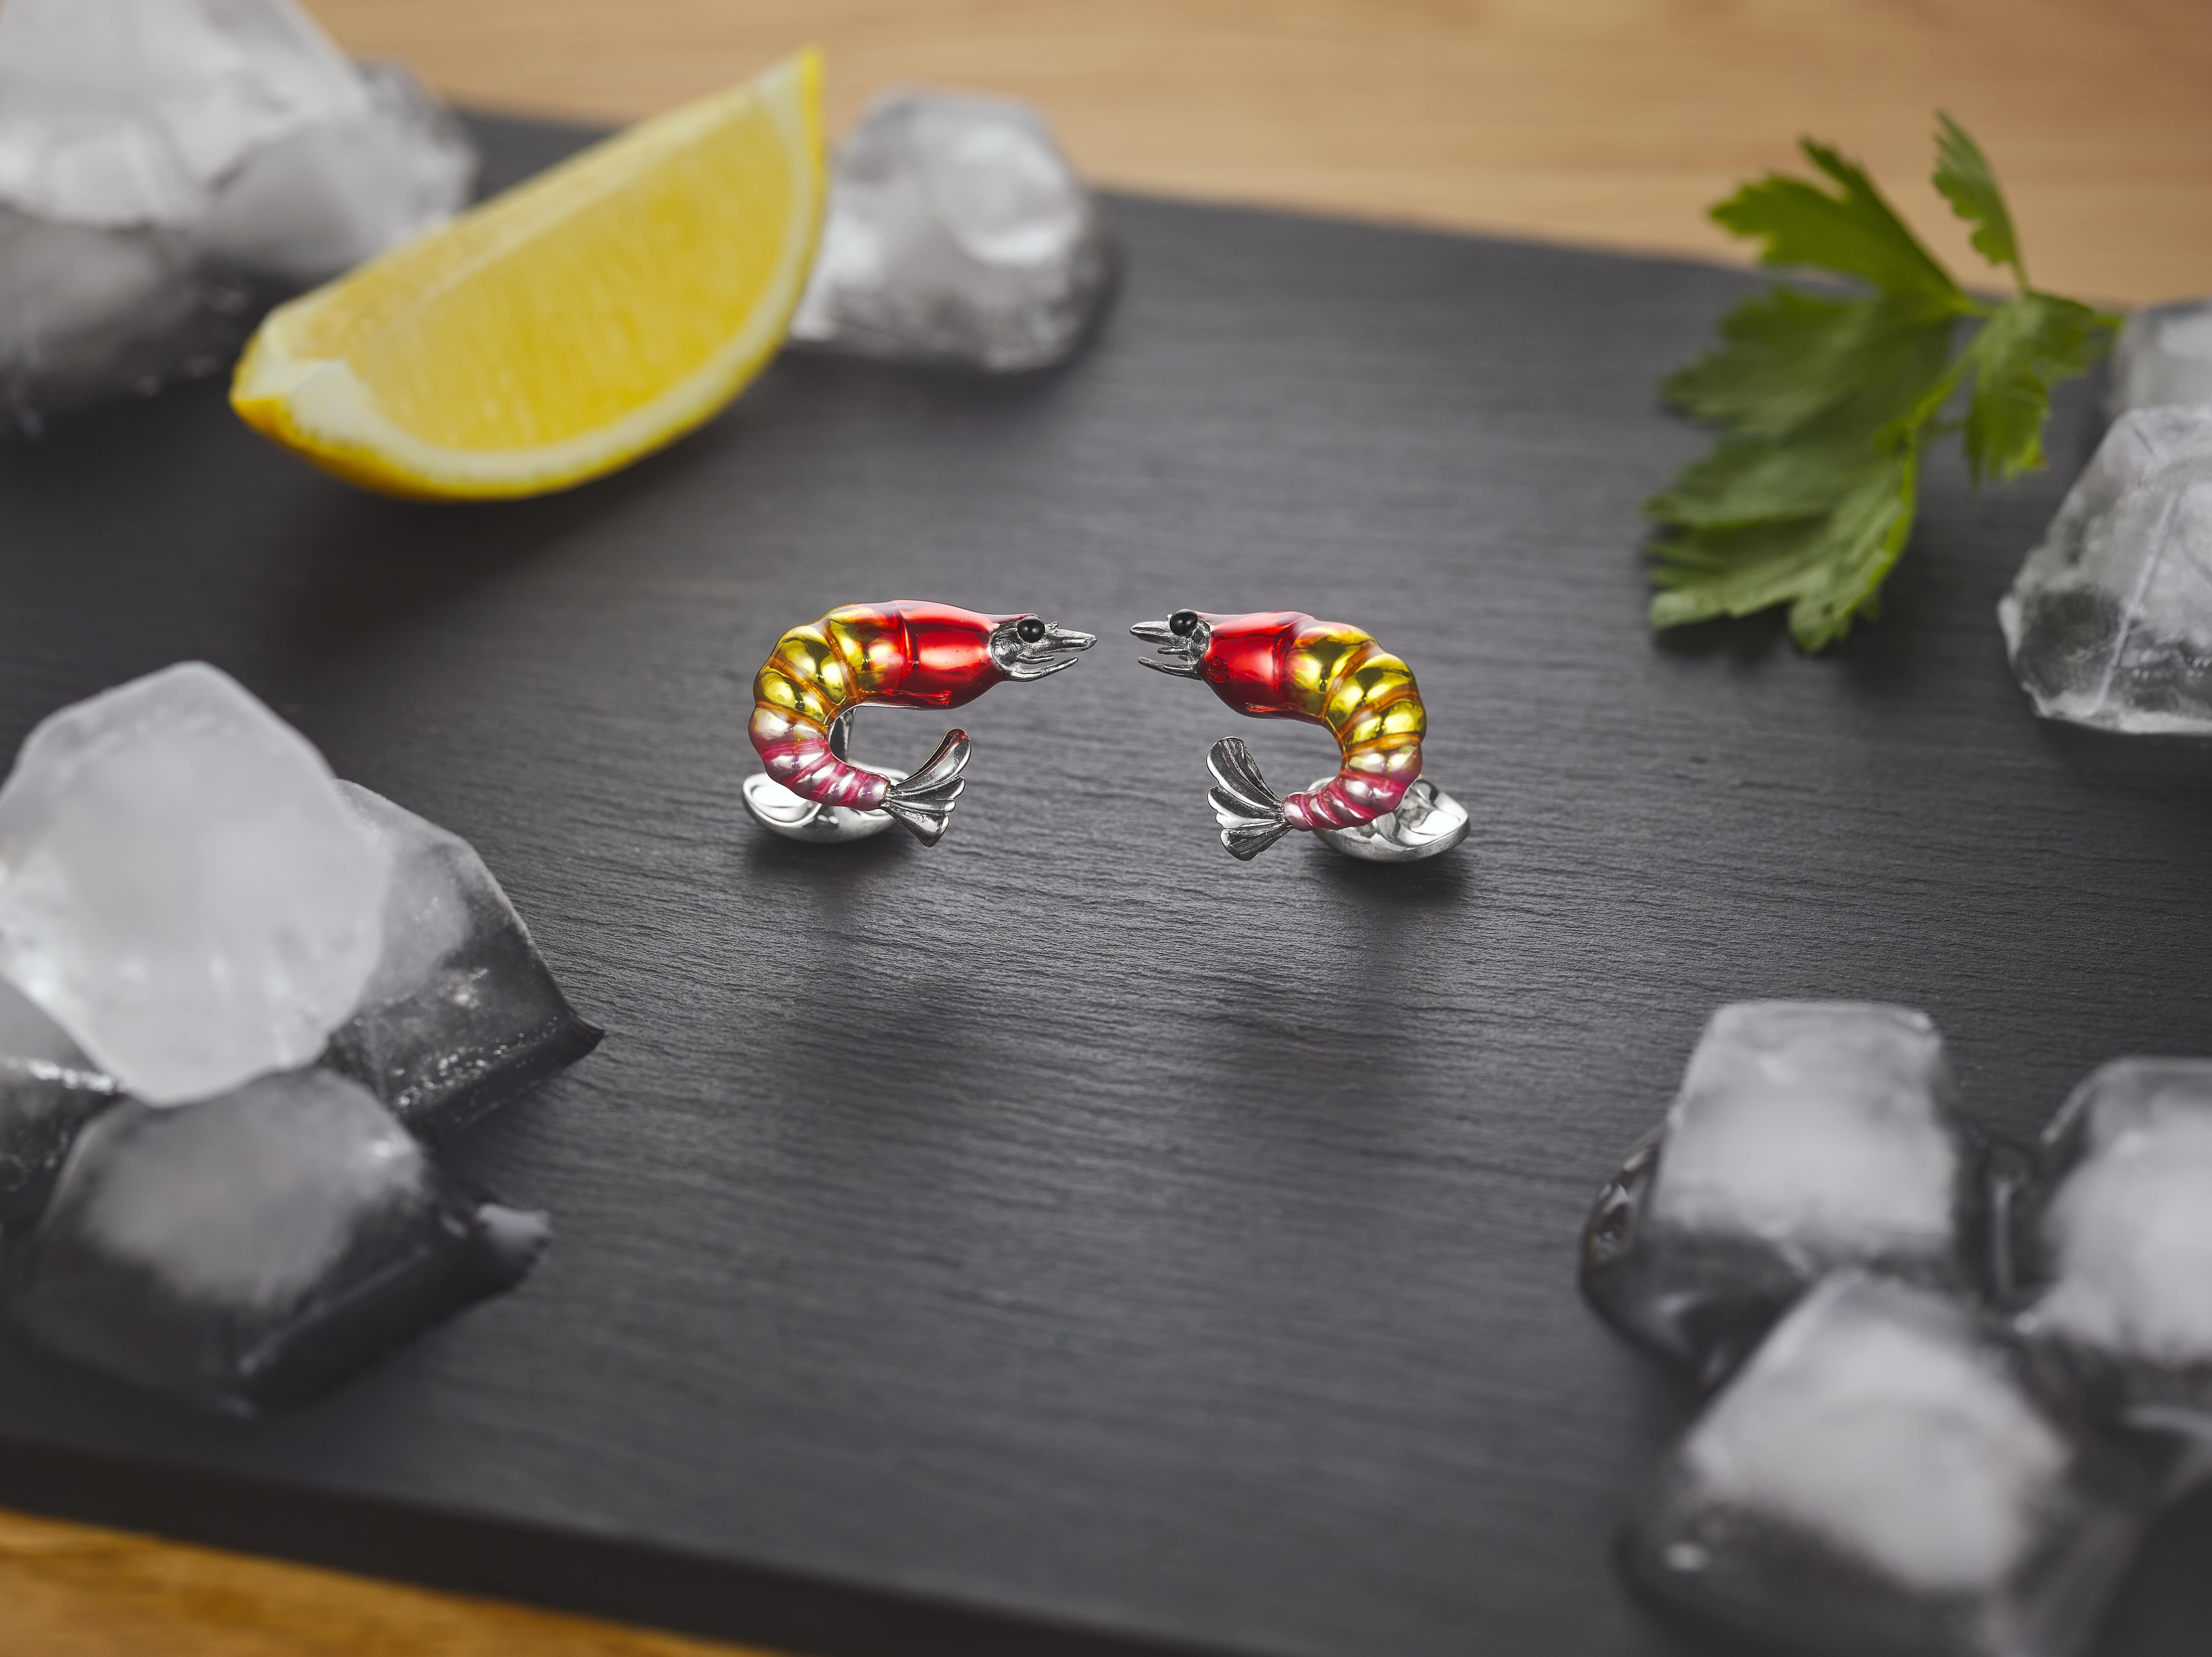 DEAKIN & FRANCIS, Piccadilly Arcade, London

Would you believe some people thought this was a lobster? Clearly vegetarian! These wonderfully tasty looking cufflinks have been known to cause quite a stir at dinner parties. The perfect gift for